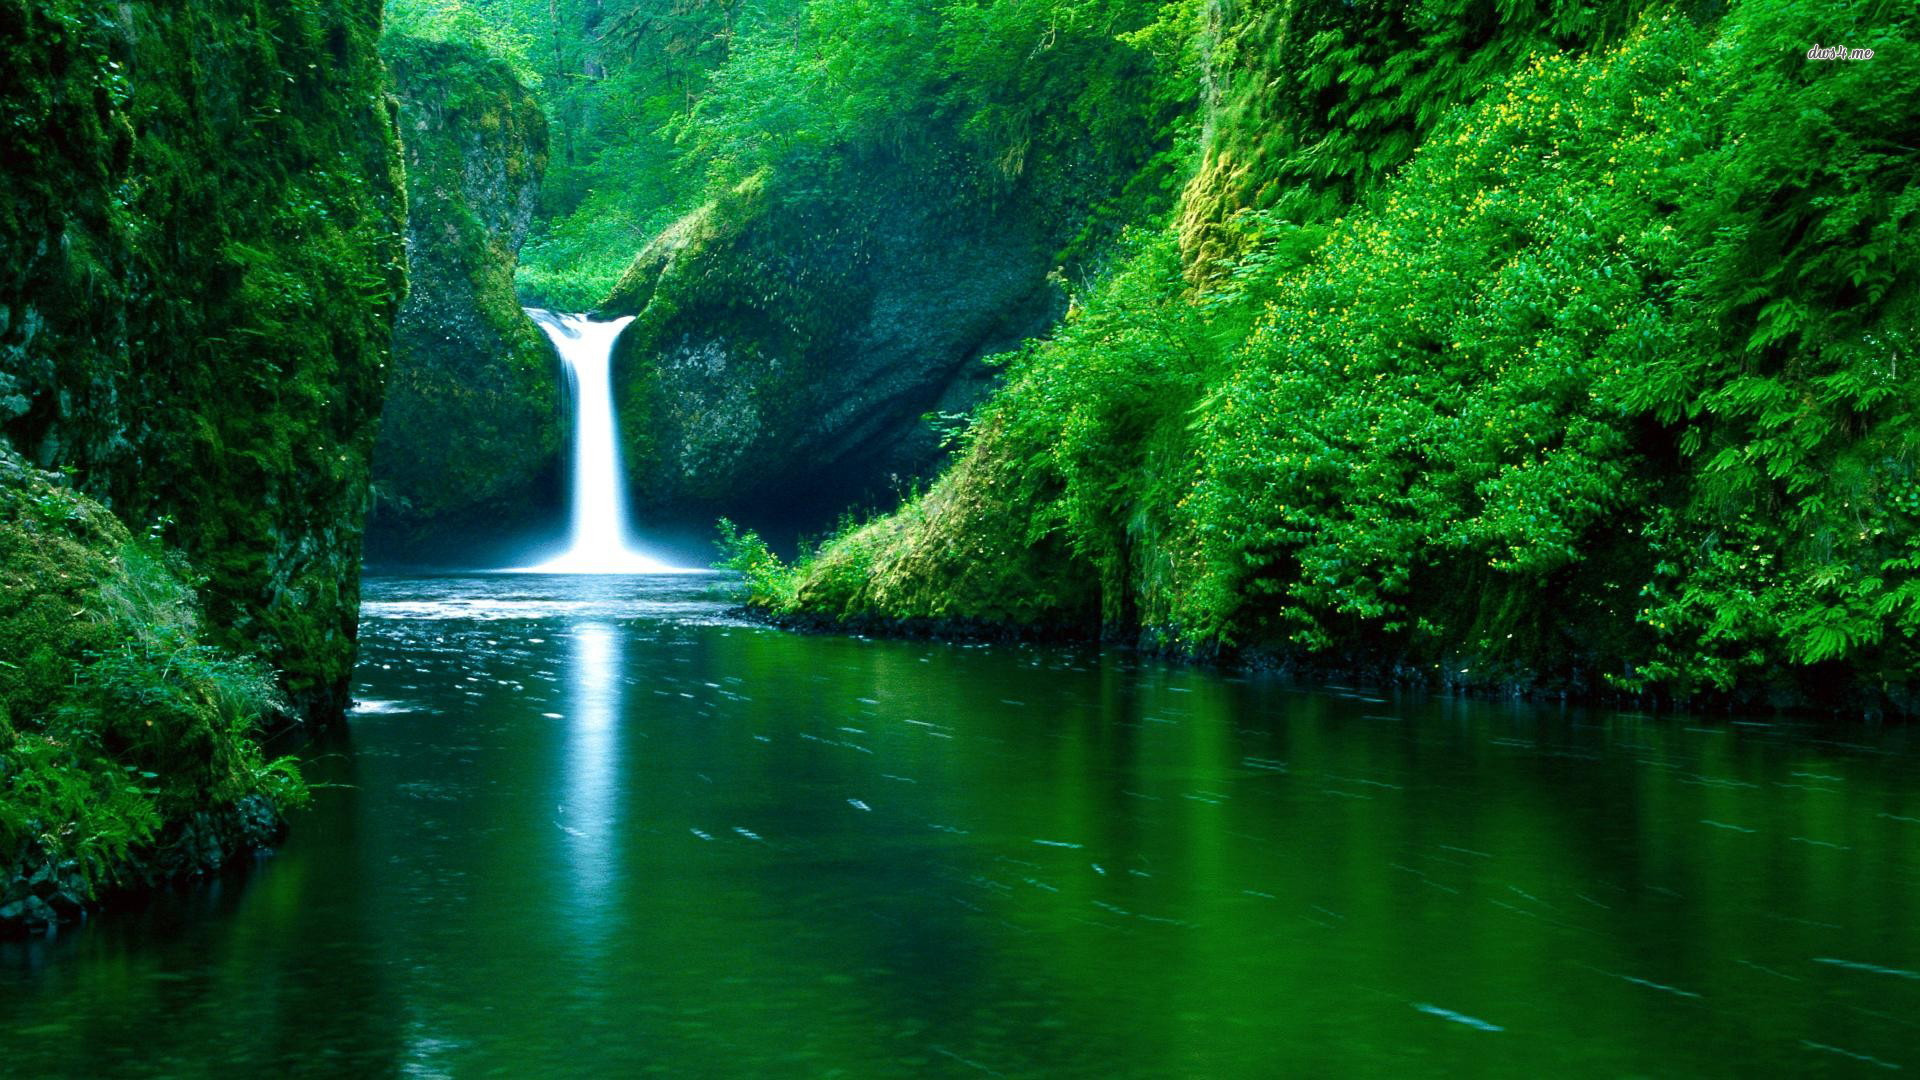 Cool Nature Backgrounds wallpaper | 1920x1080 | #8301